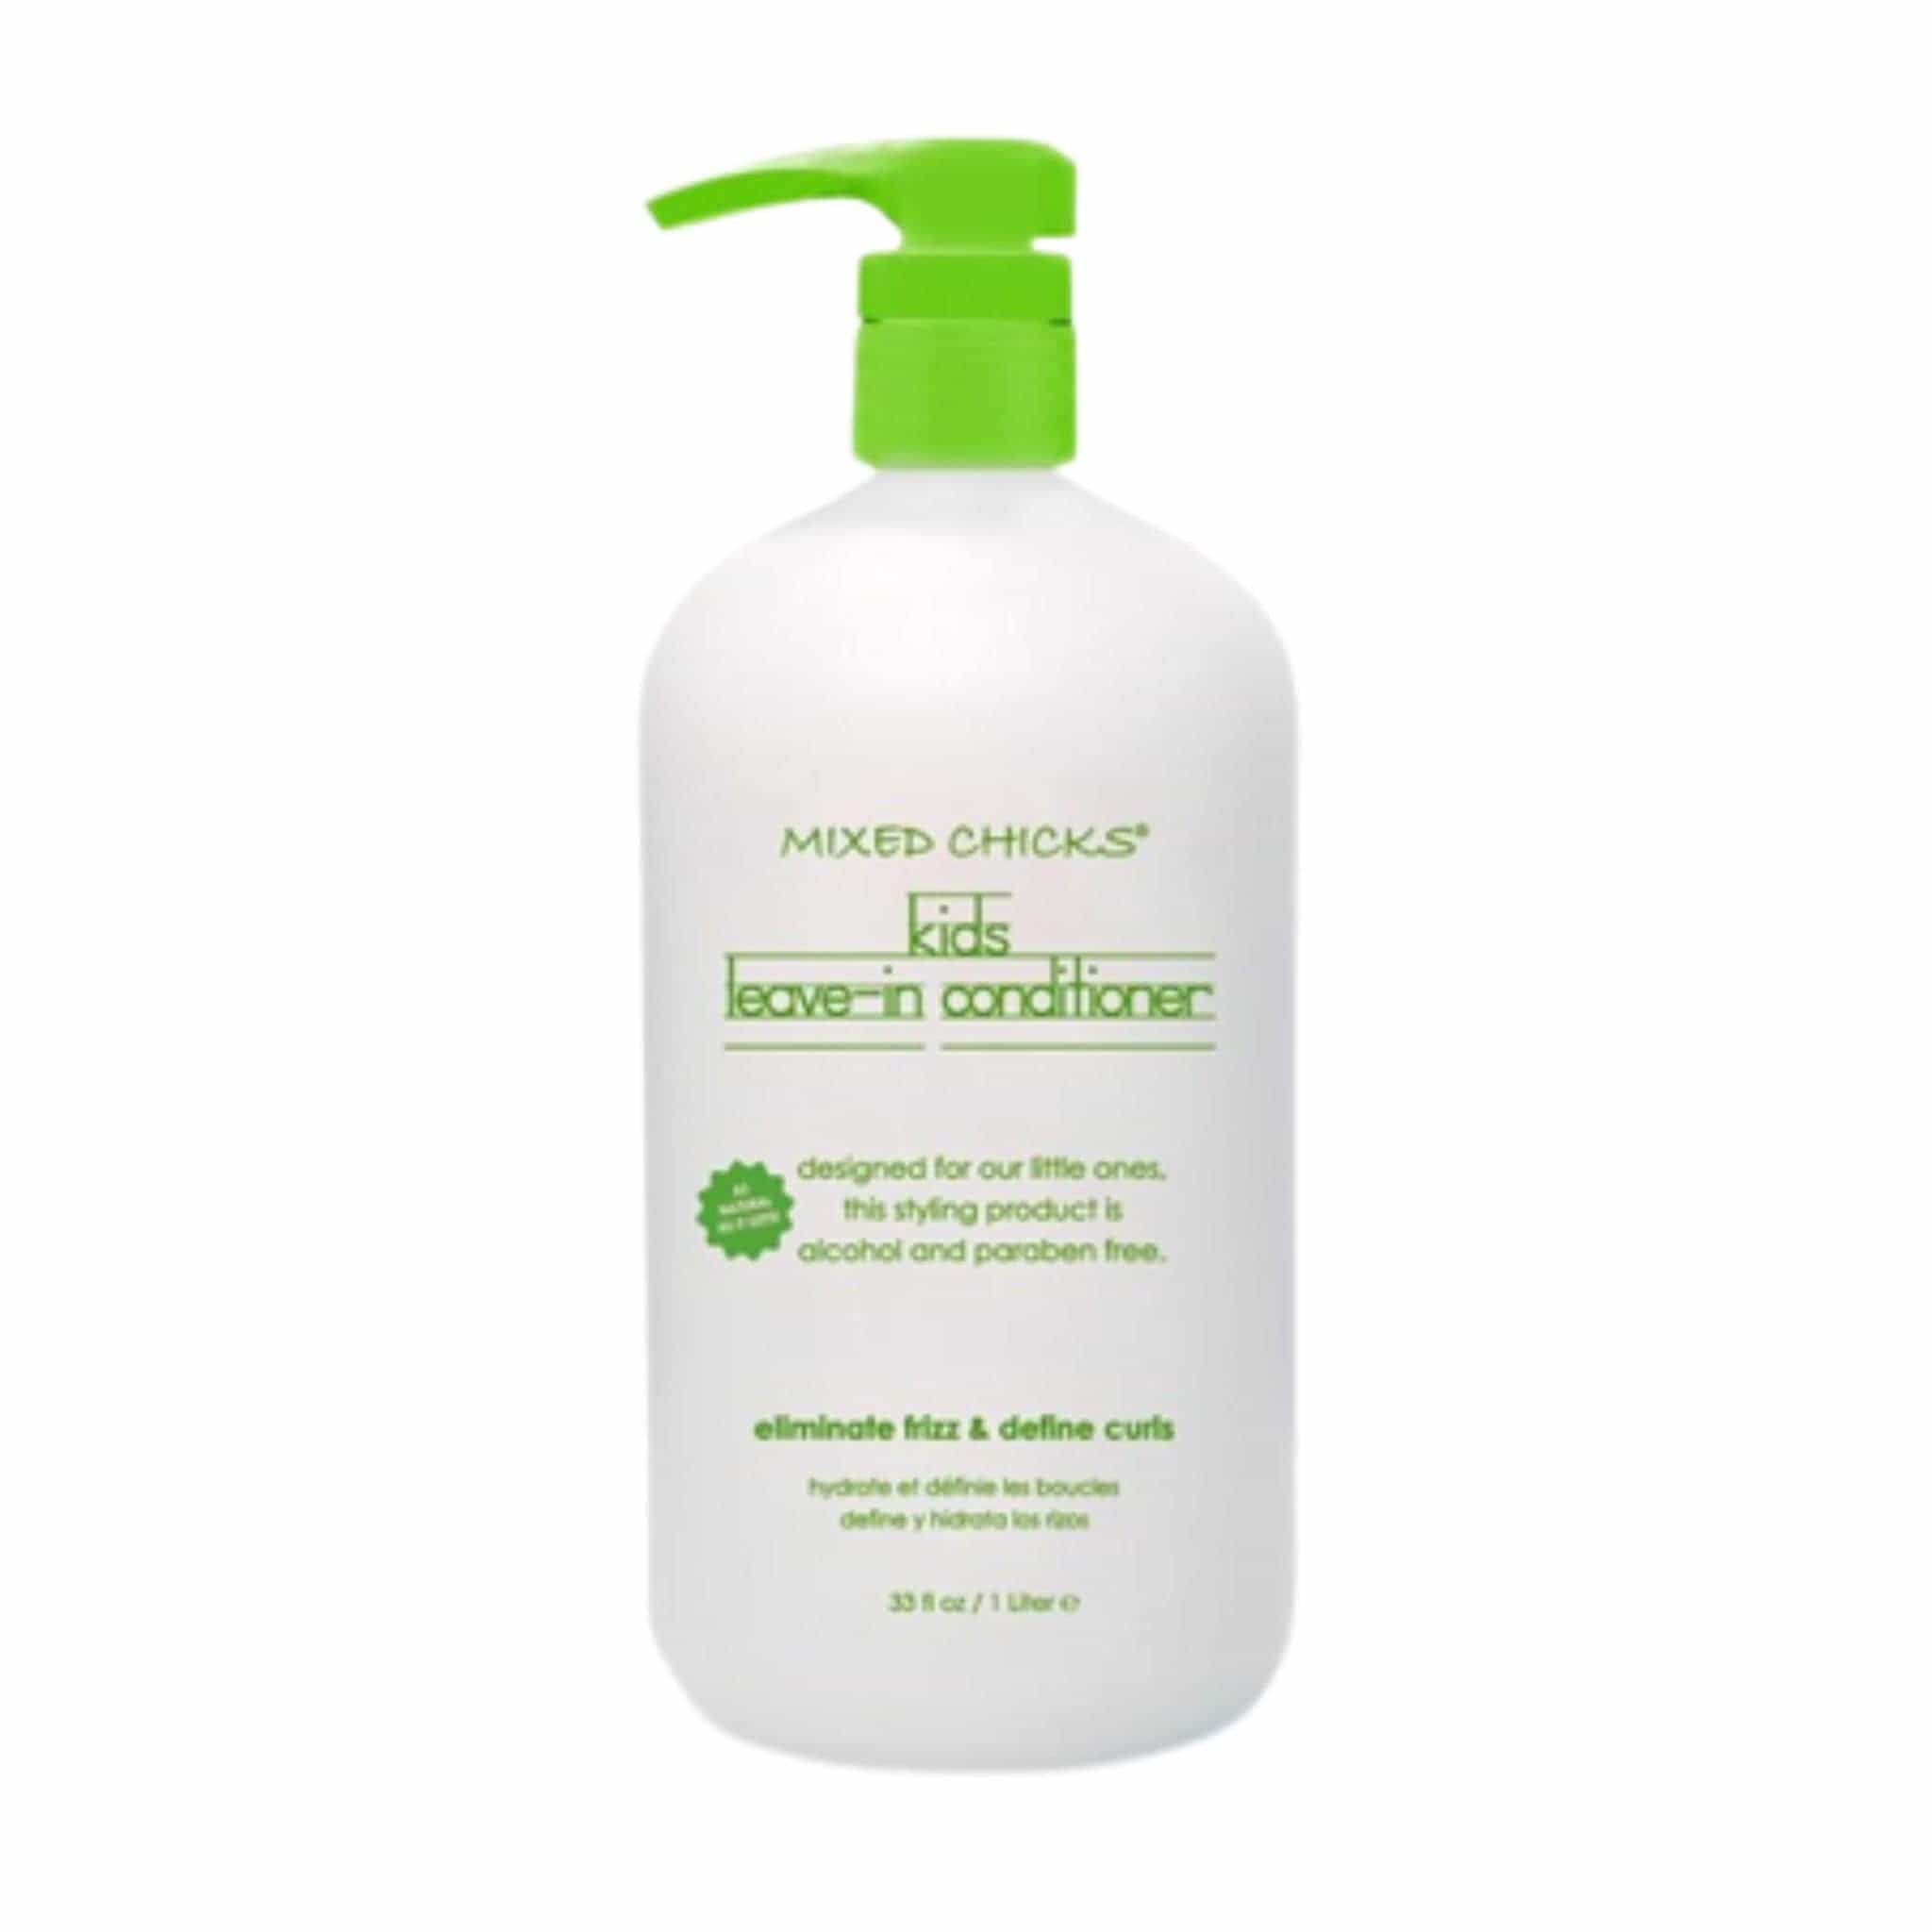 Mixed Chicks Kids Leave-In Conditioner 32oz.